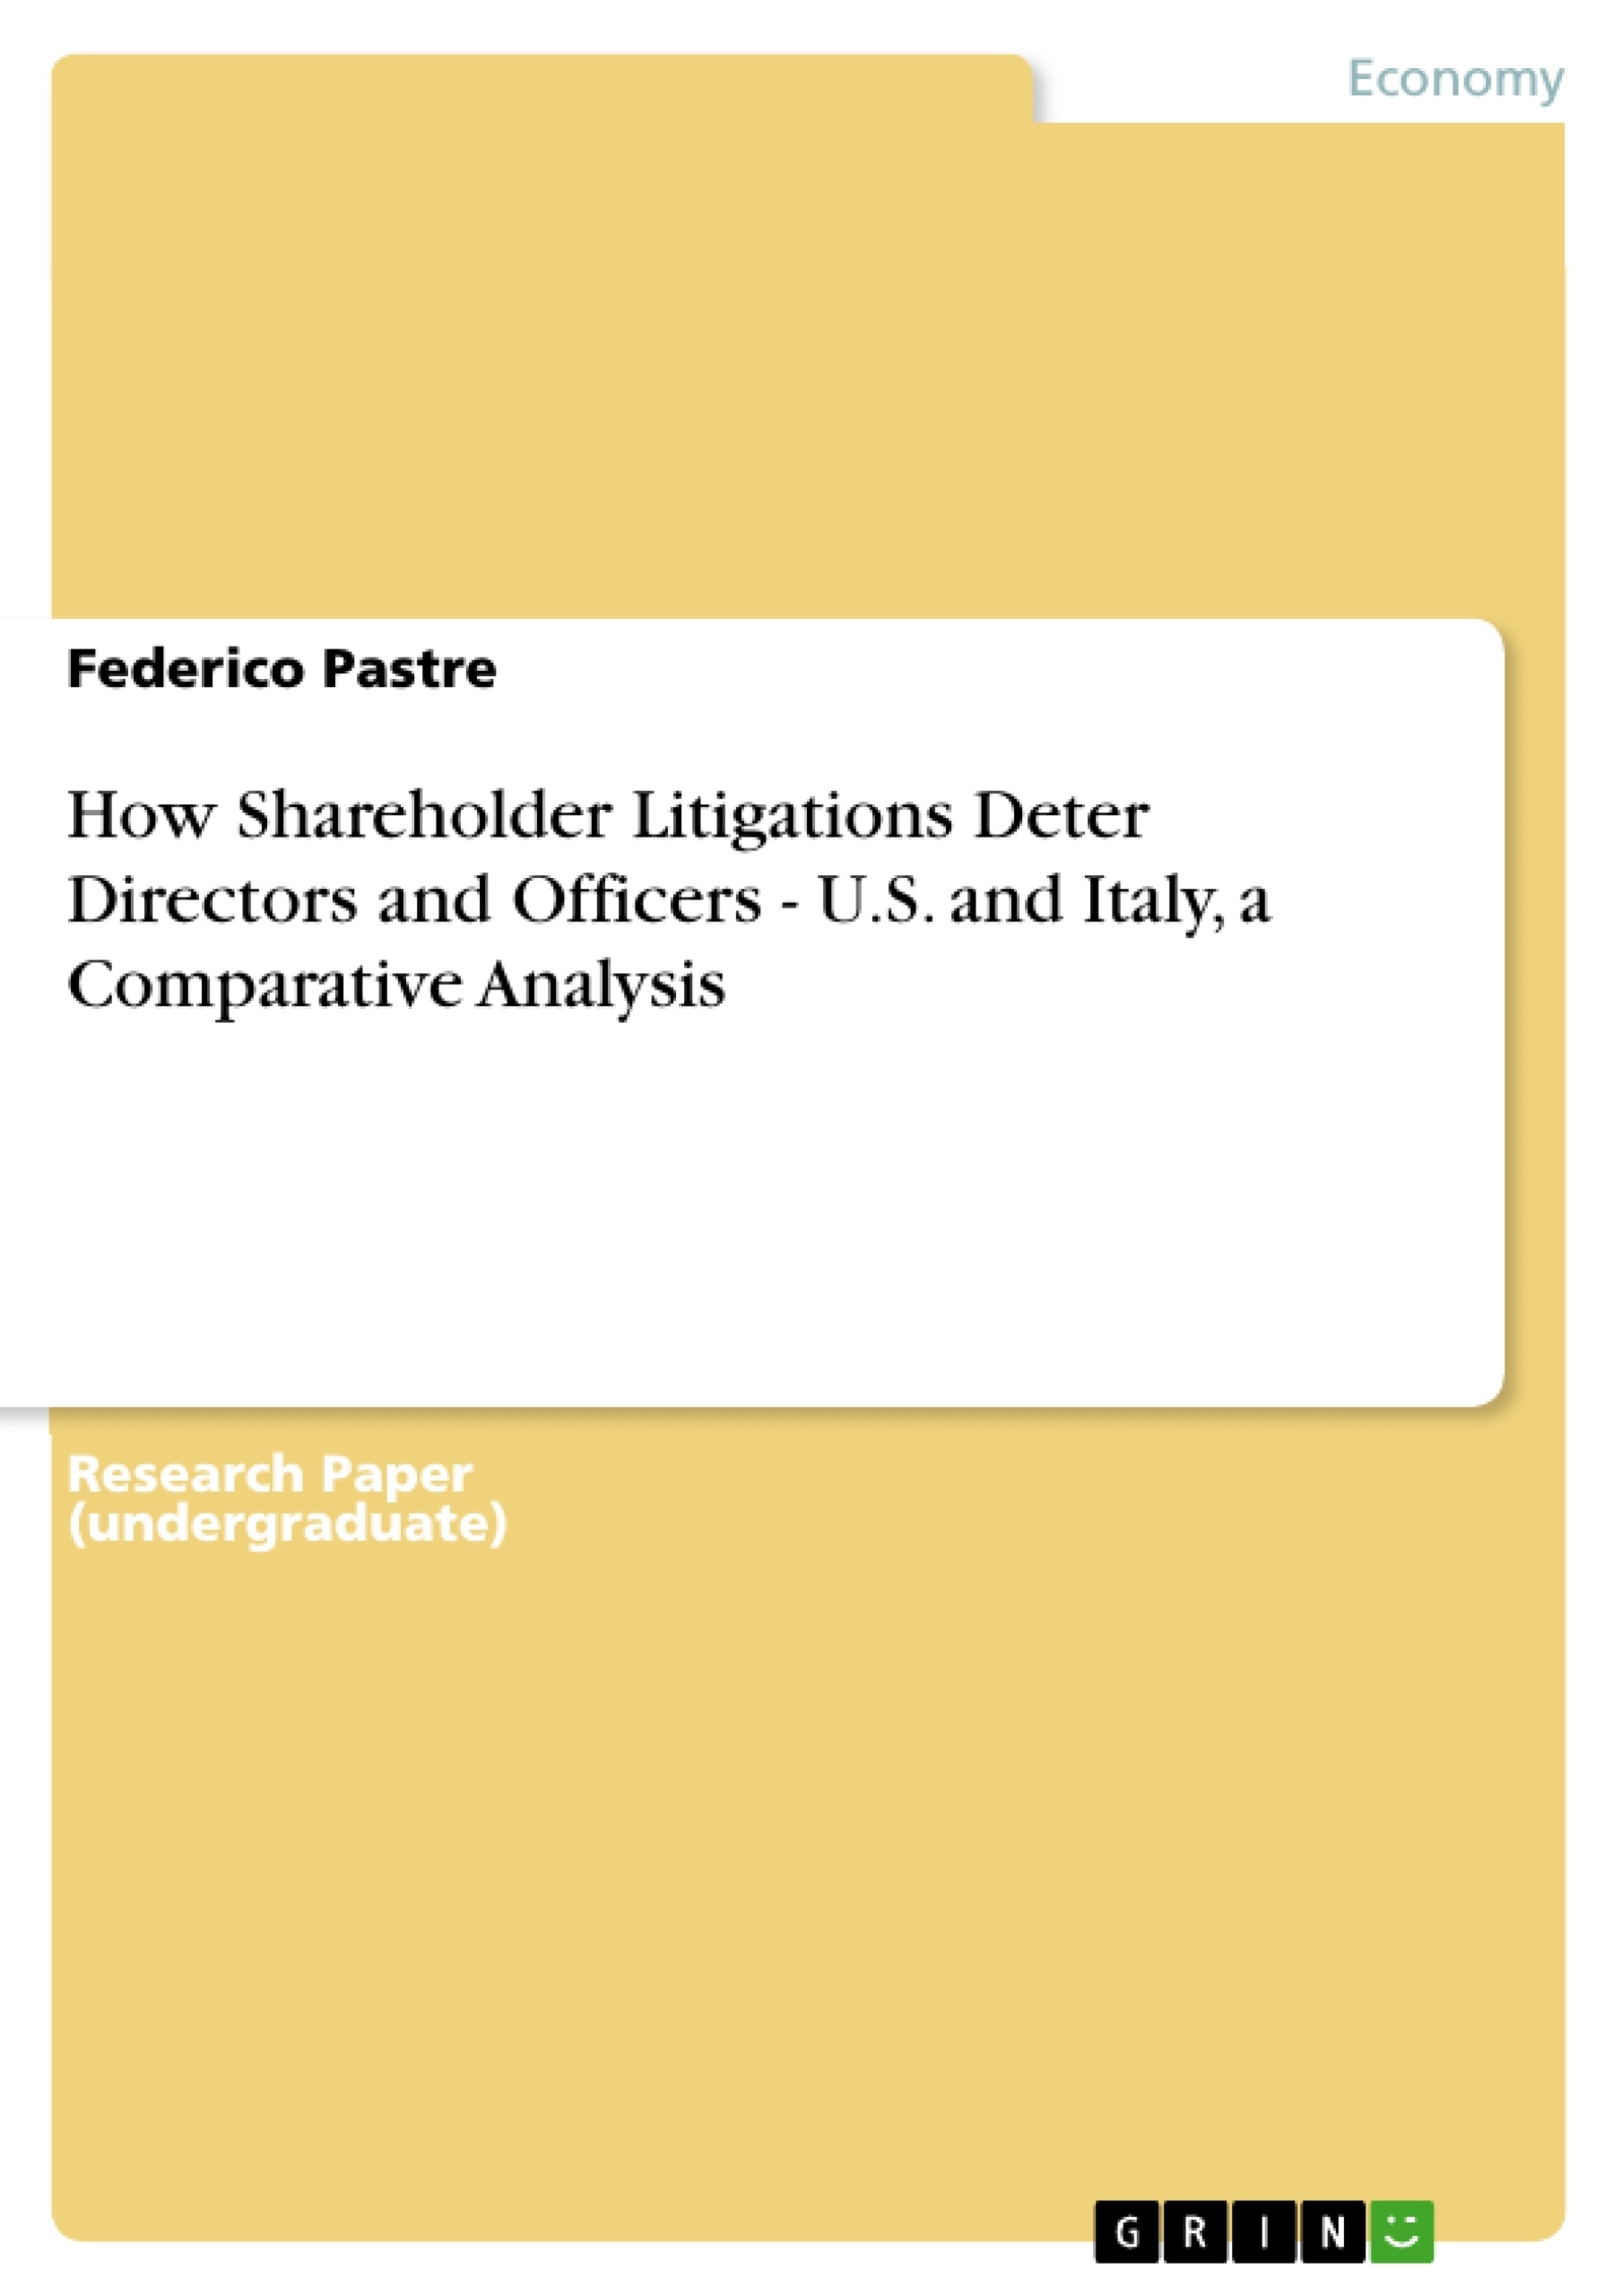 Título: How Shareholder Litigations Deter Directors and Officers - U.S. and Italy, a Comparative Analysis